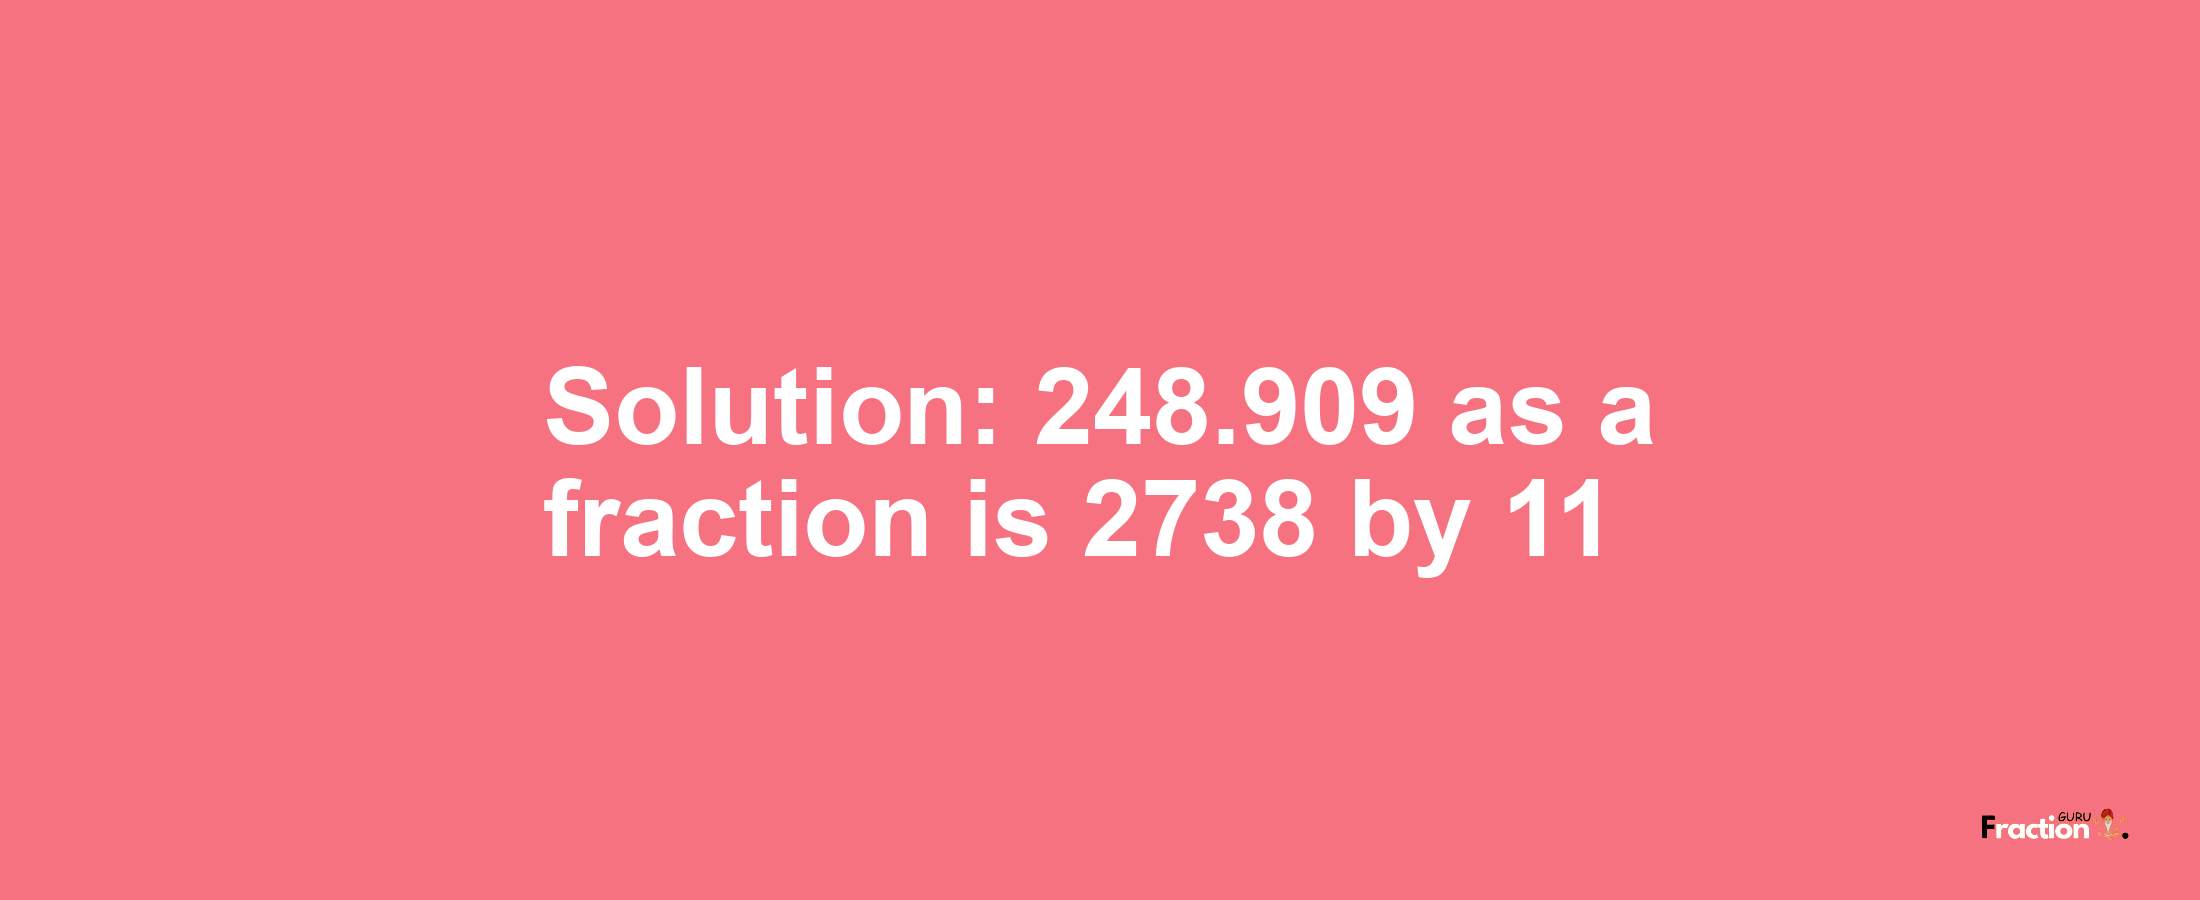 Solution:248.909 as a fraction is 2738/11